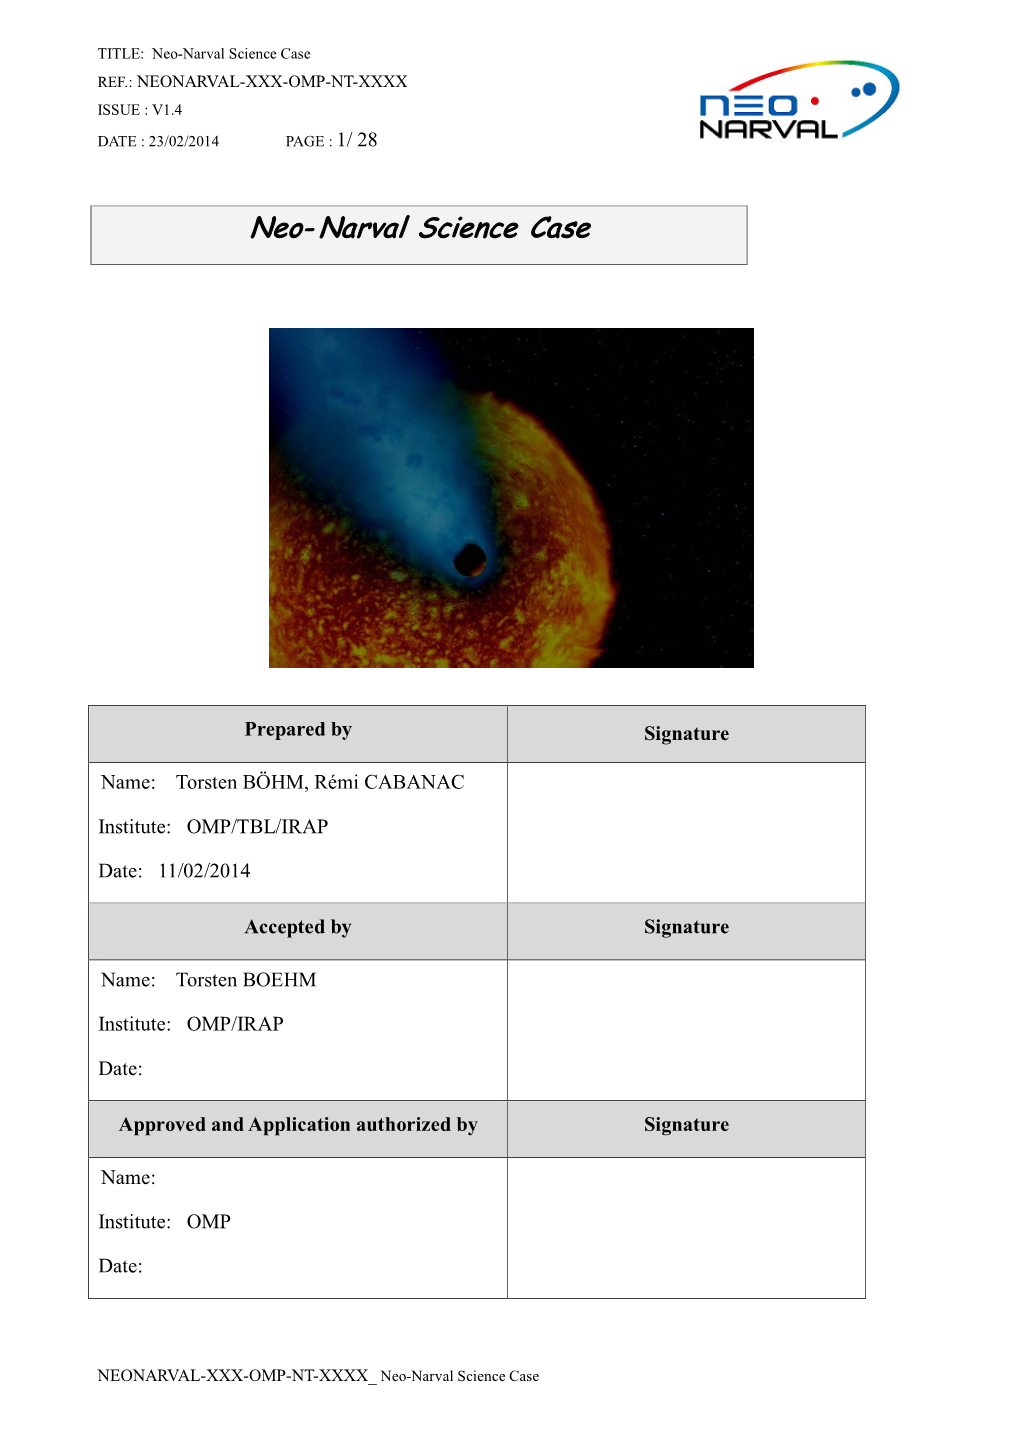 Neo-Narval Science Case REF.: NEONARVAL-XXX-OMP-NT-XXXX ISSUE : V1.4 DAT E : 23/02/2014 PAGE : 1/ 28